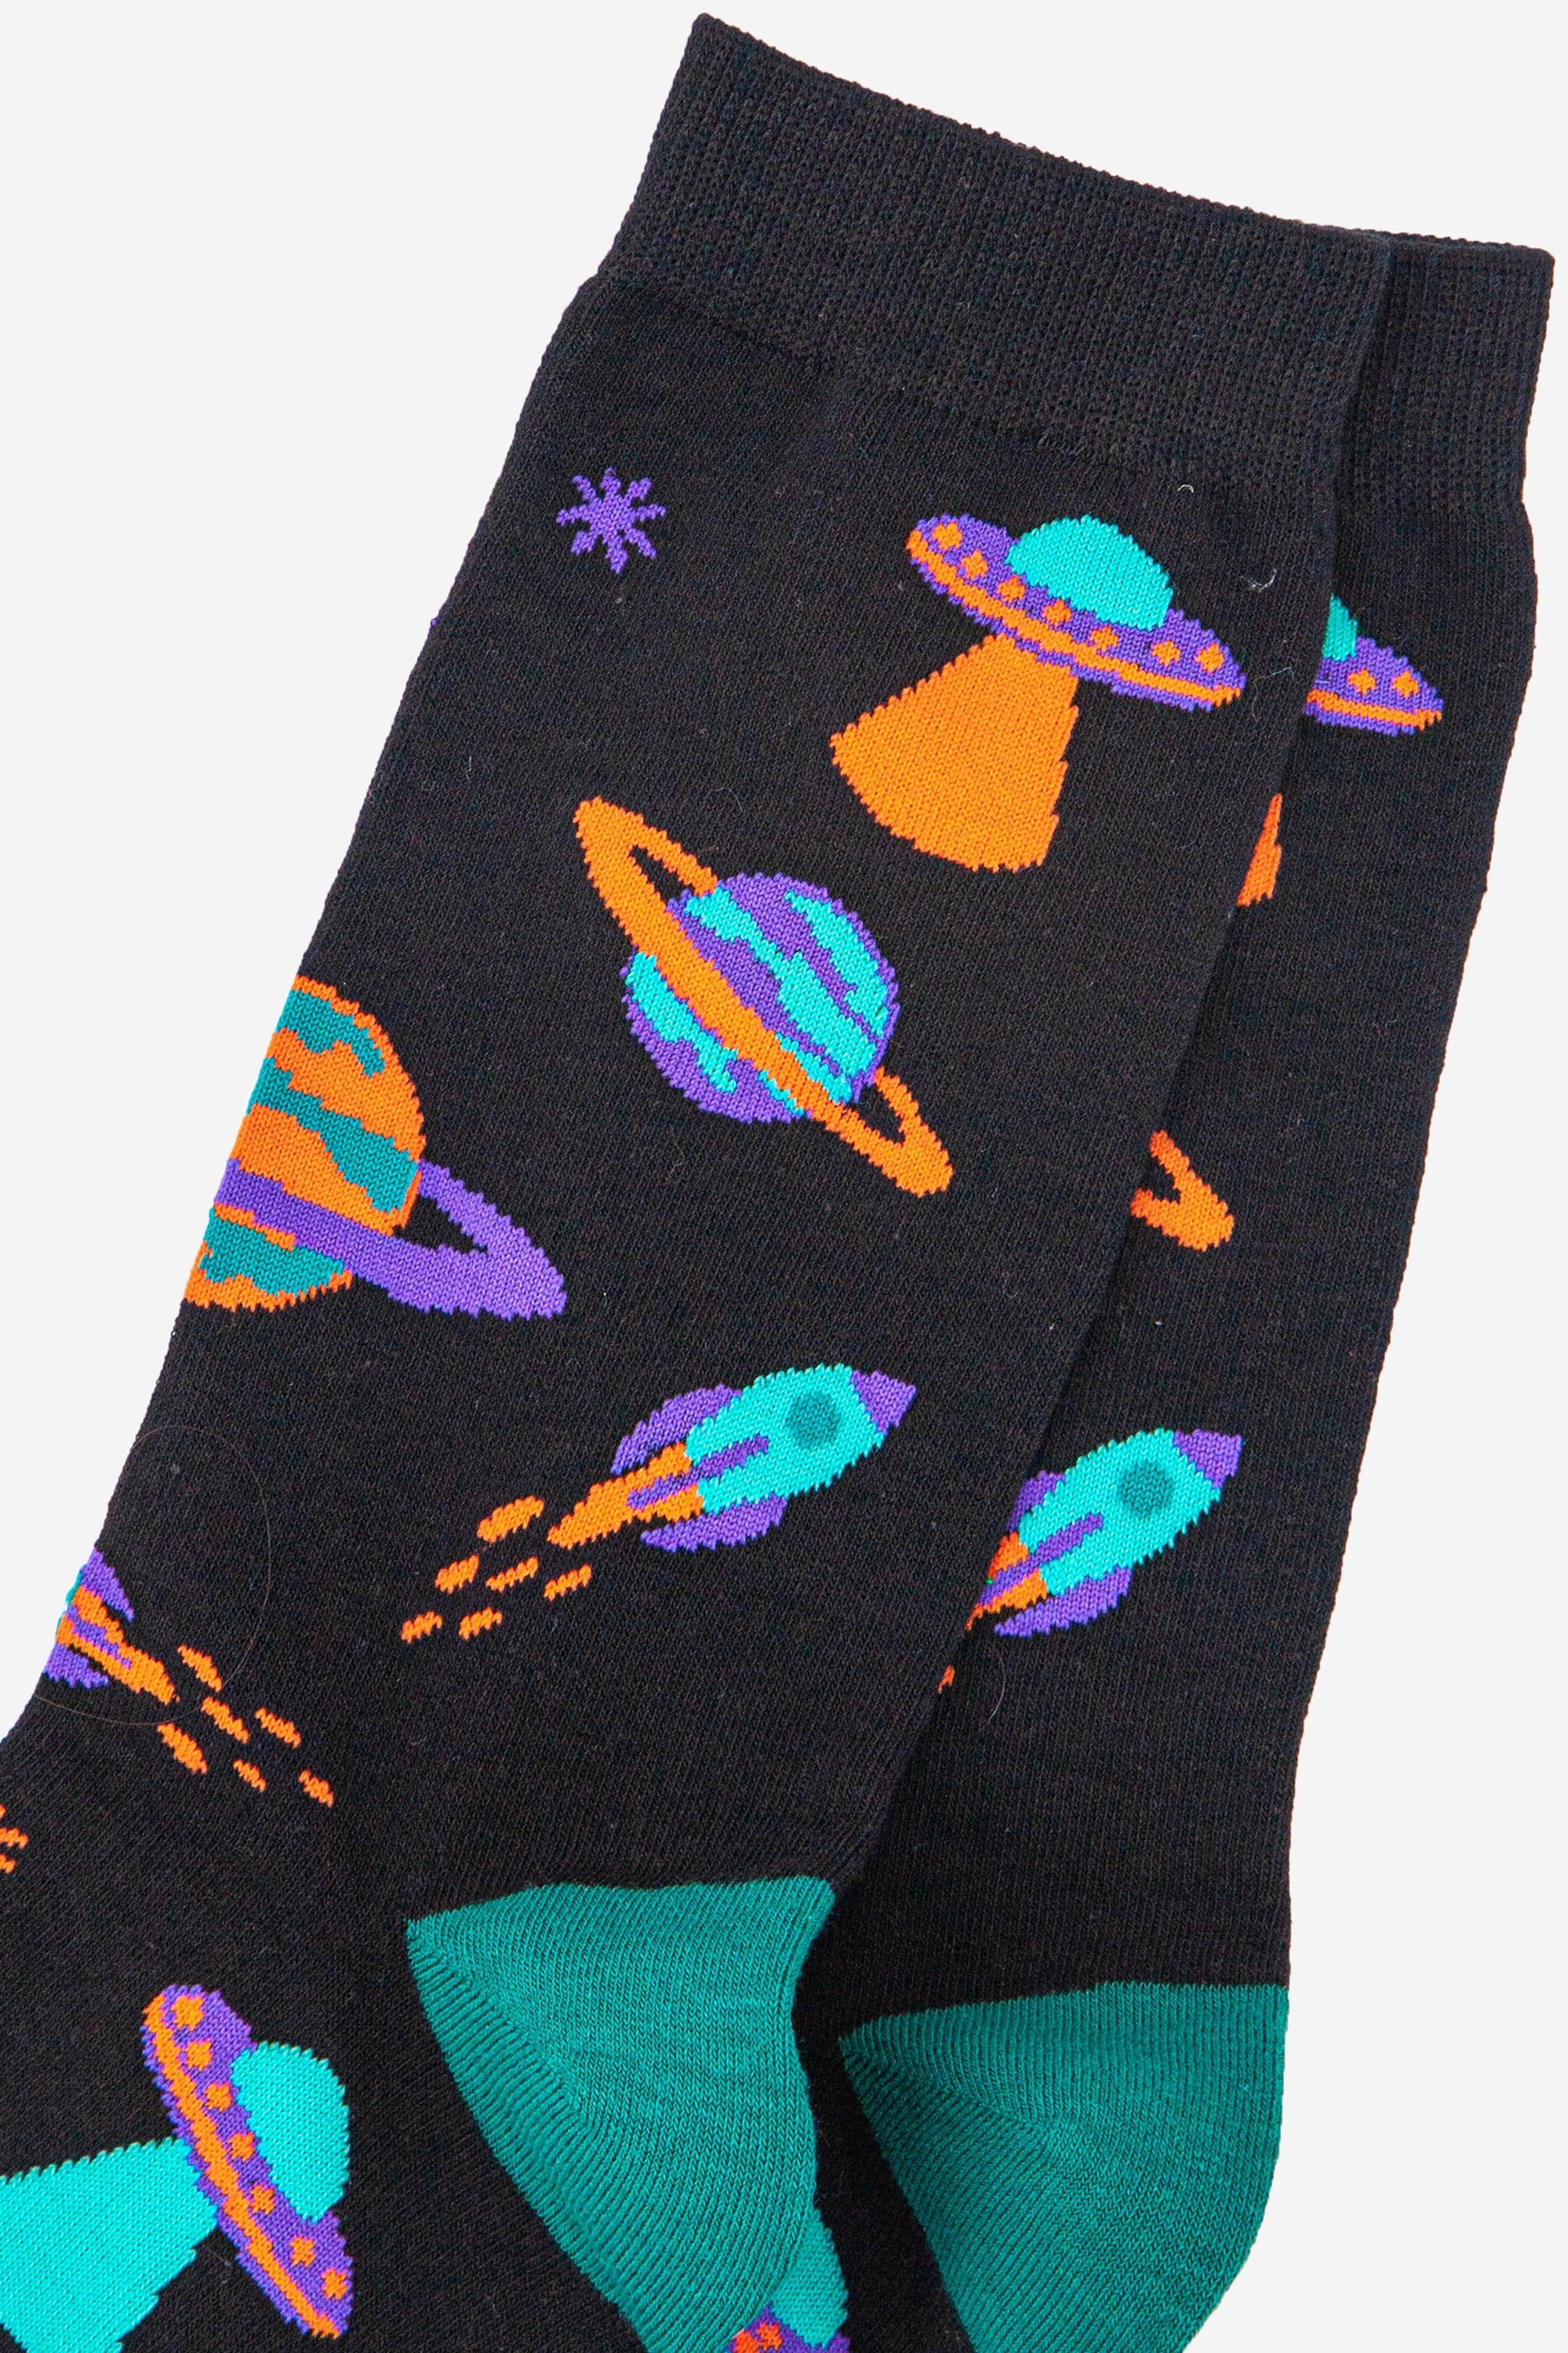 close up of the retro space design showing the rockets, spaceships and planets which are all in orange, blue and purple